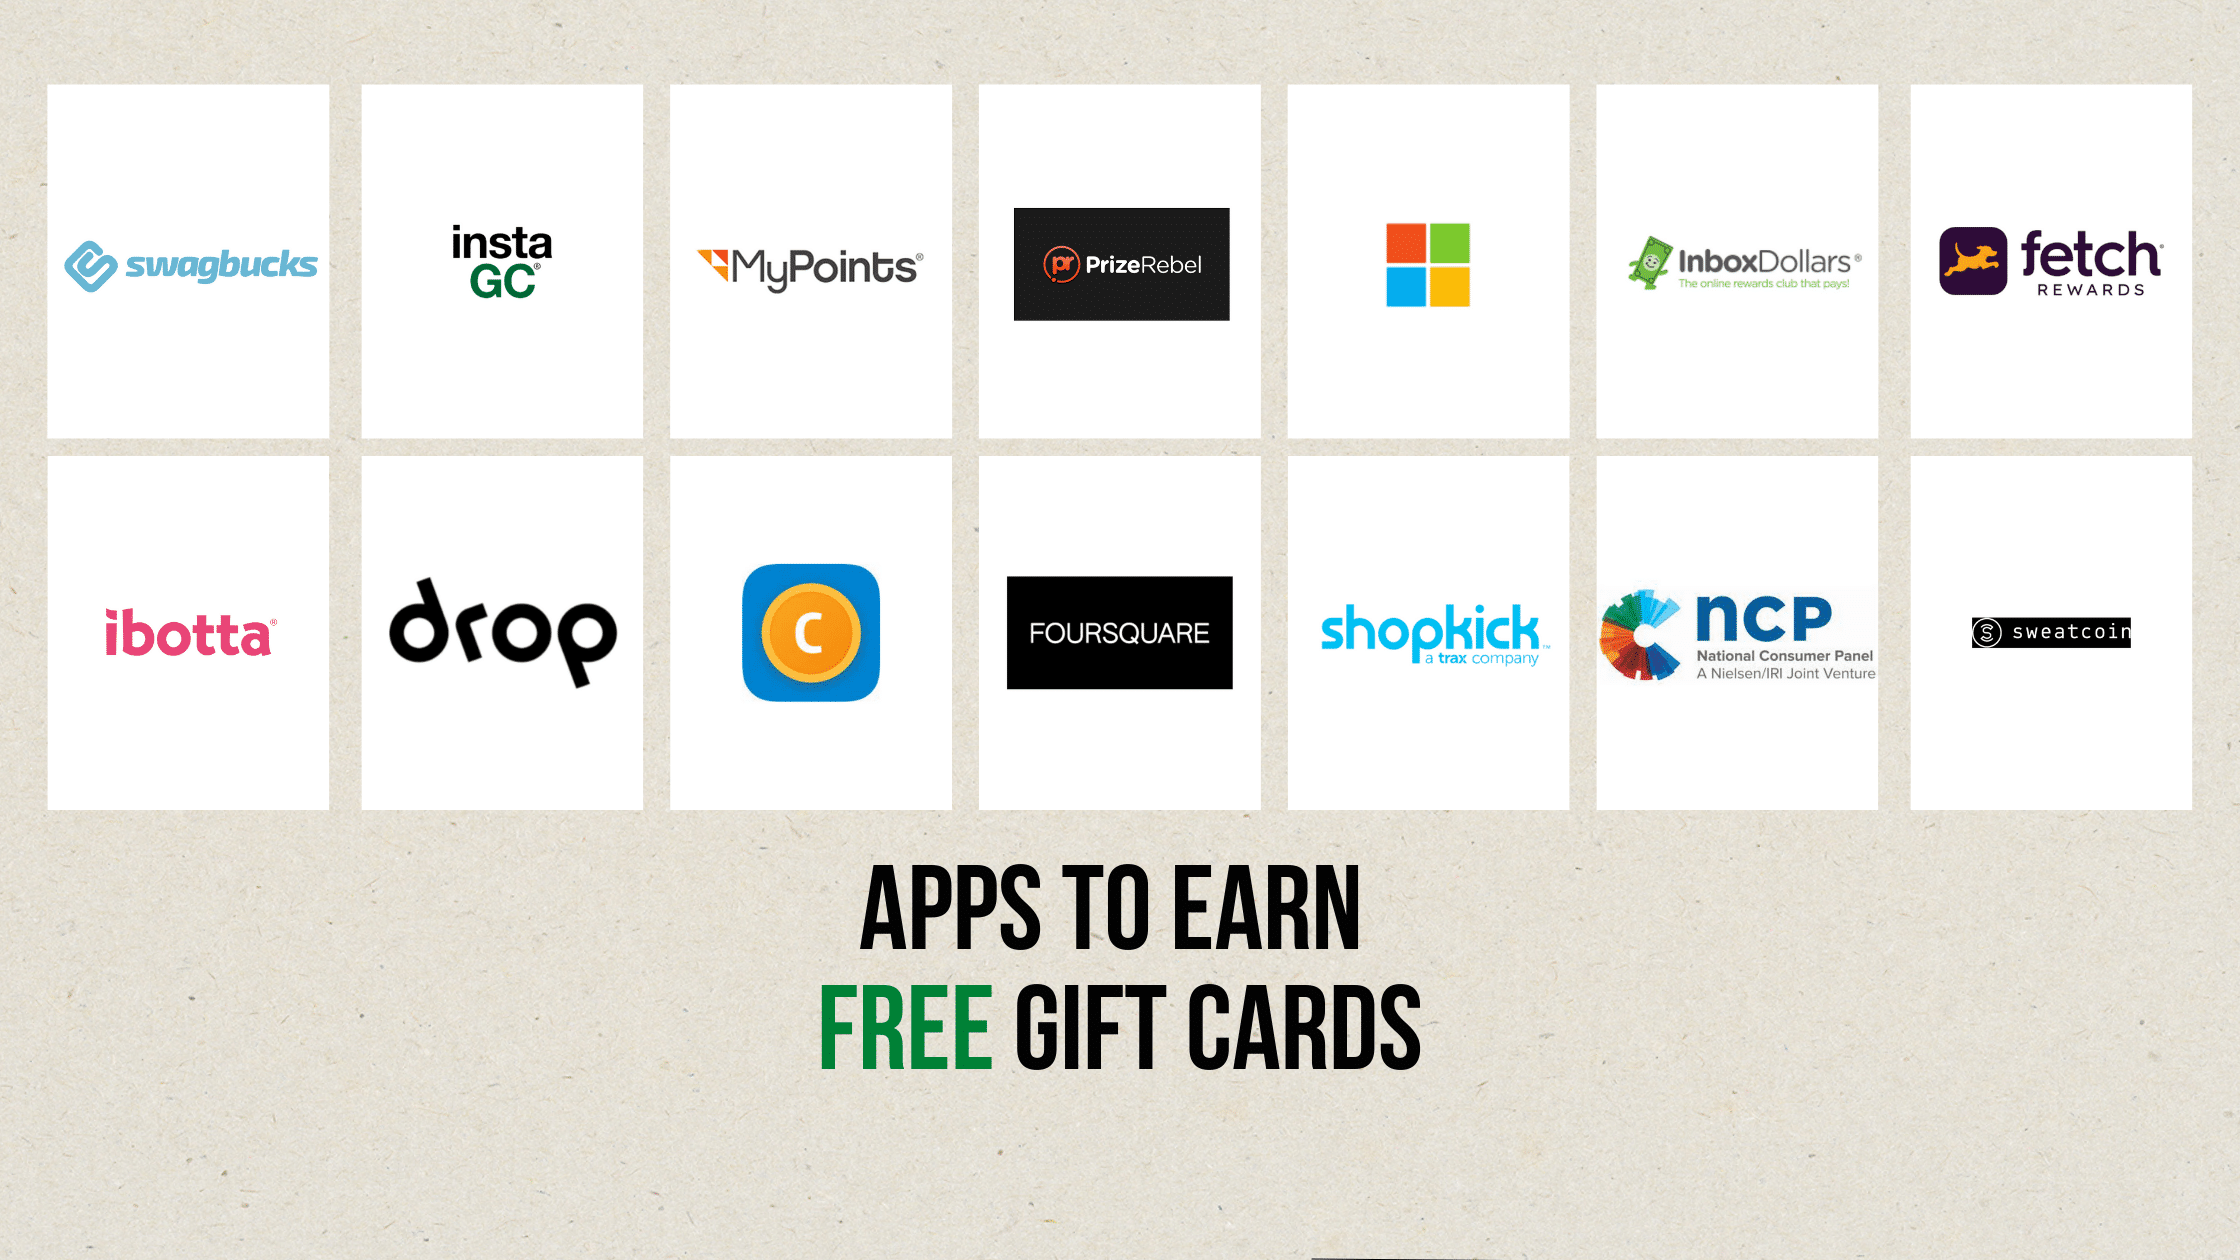 Free Xbox Gift Cards from Fetch  Earn Points, Redeem Rewards for Xbox